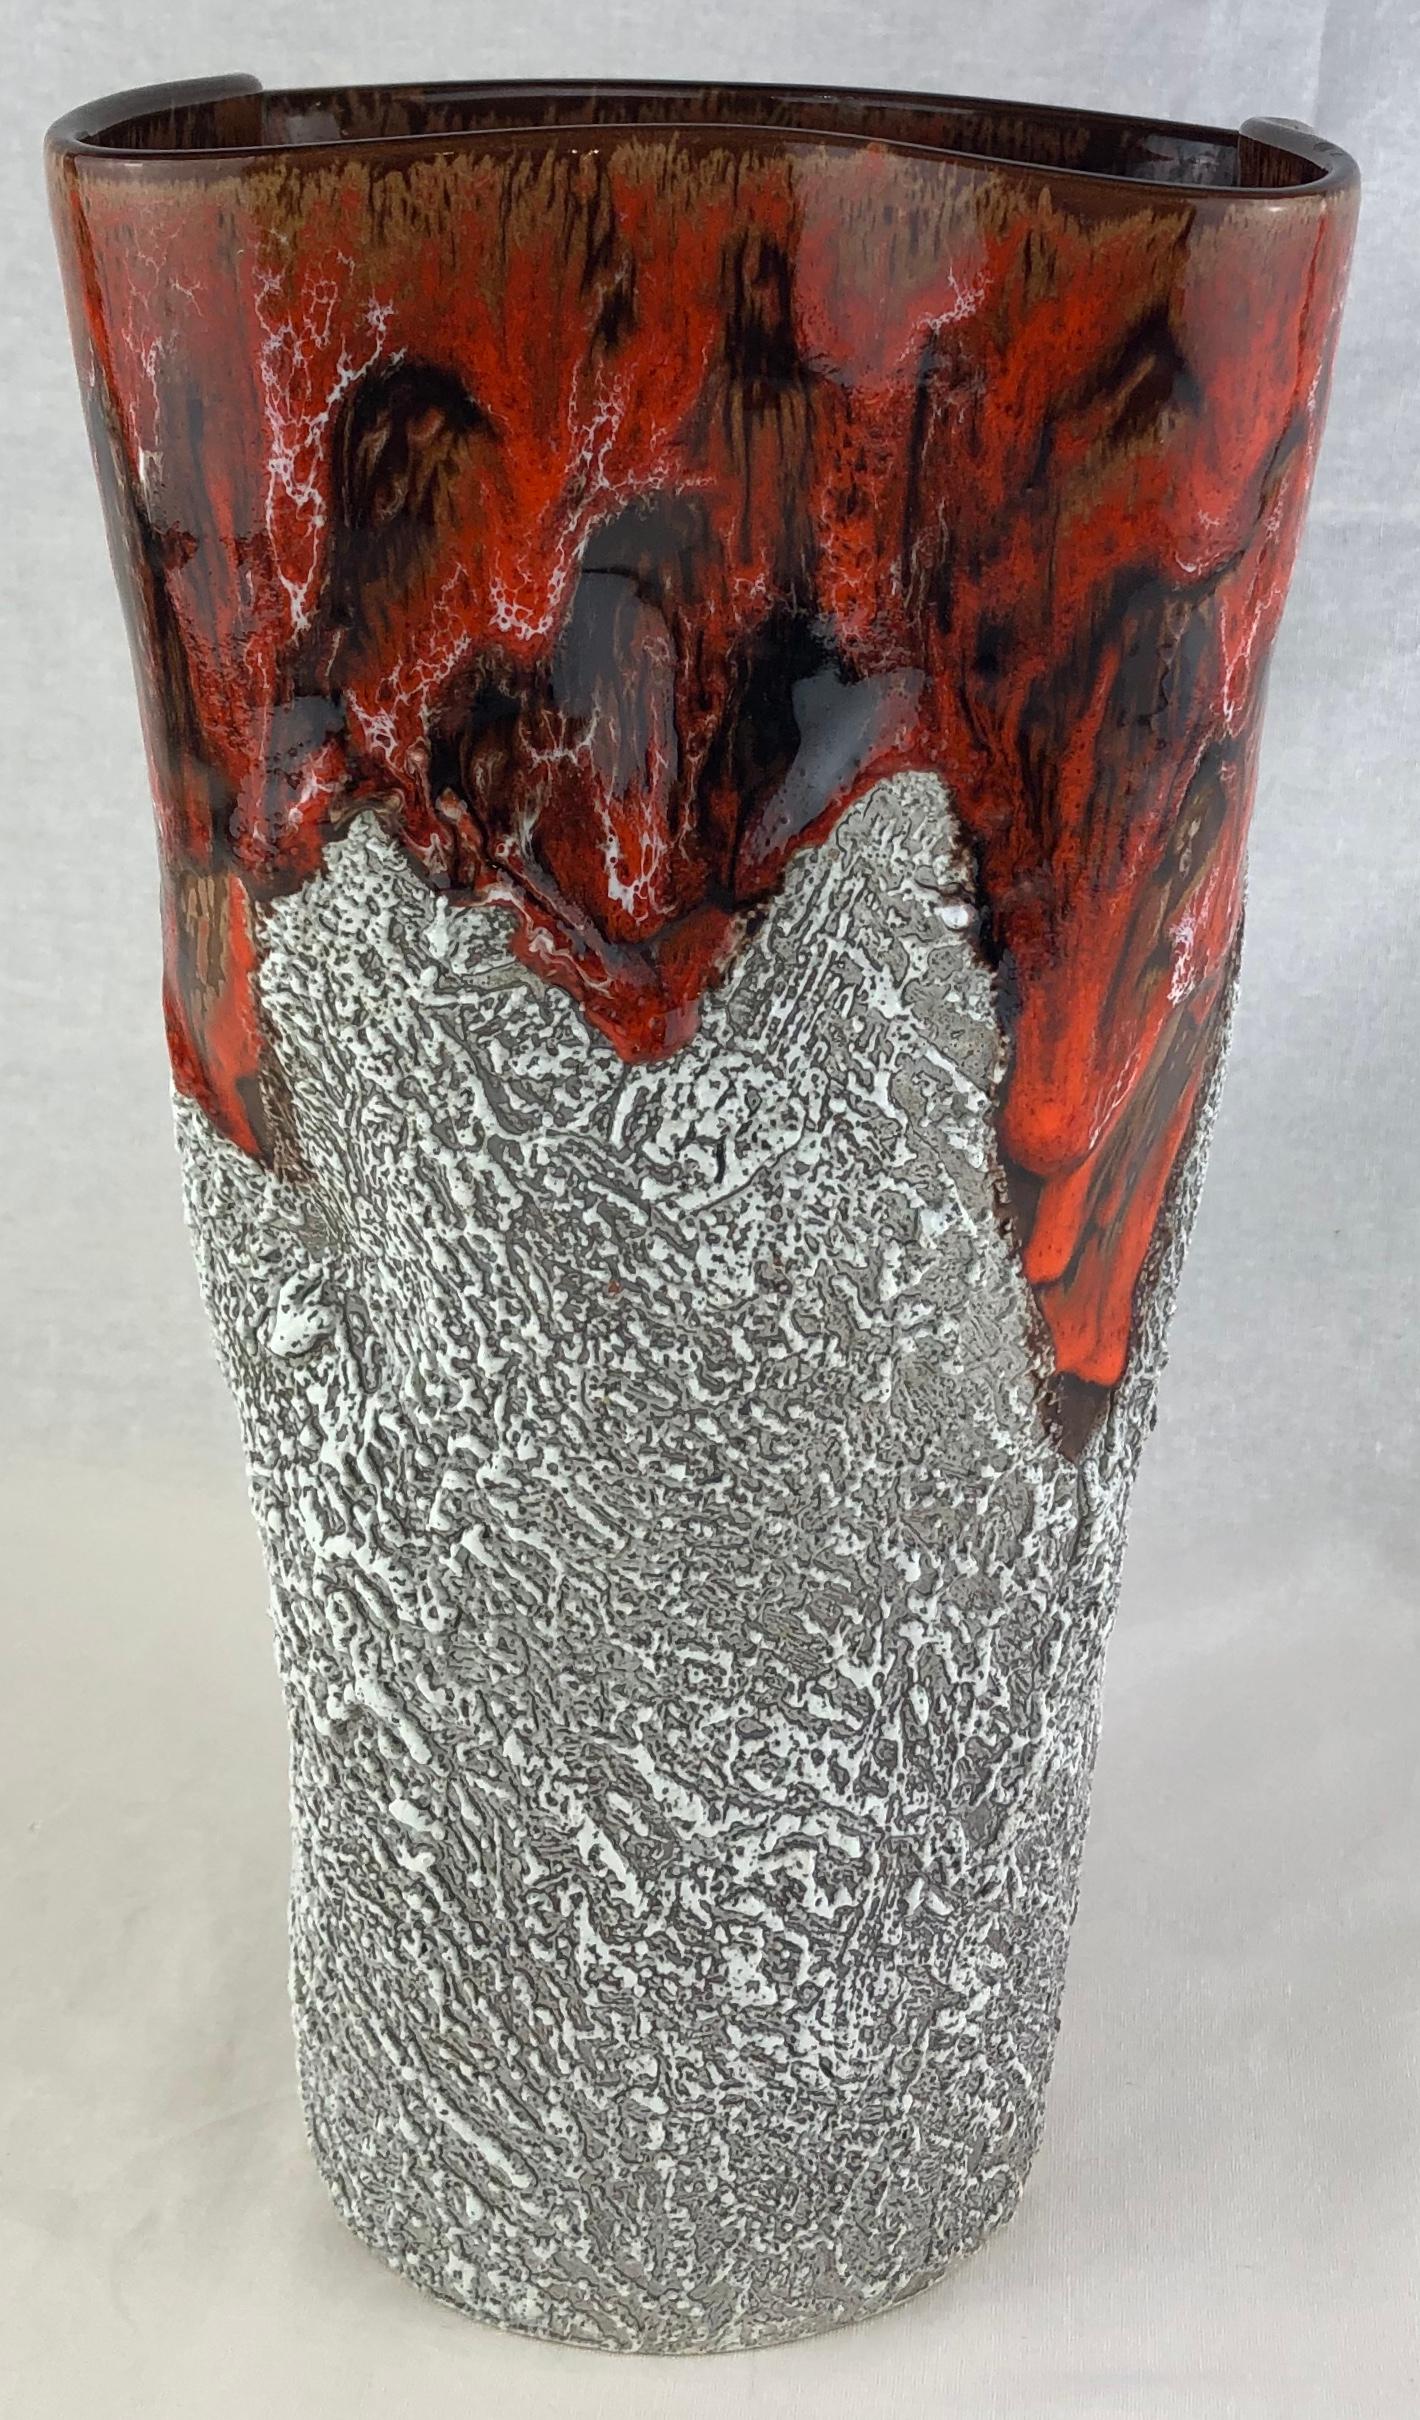 Beautiful ceramic vase from Vallauris, France handcrafted and glazed. The lava style design is placed on a white background with overlays of grey and brown hues.

Circa 1950s, designed and created in the manner of both Charles Cart. 

Charles Cart